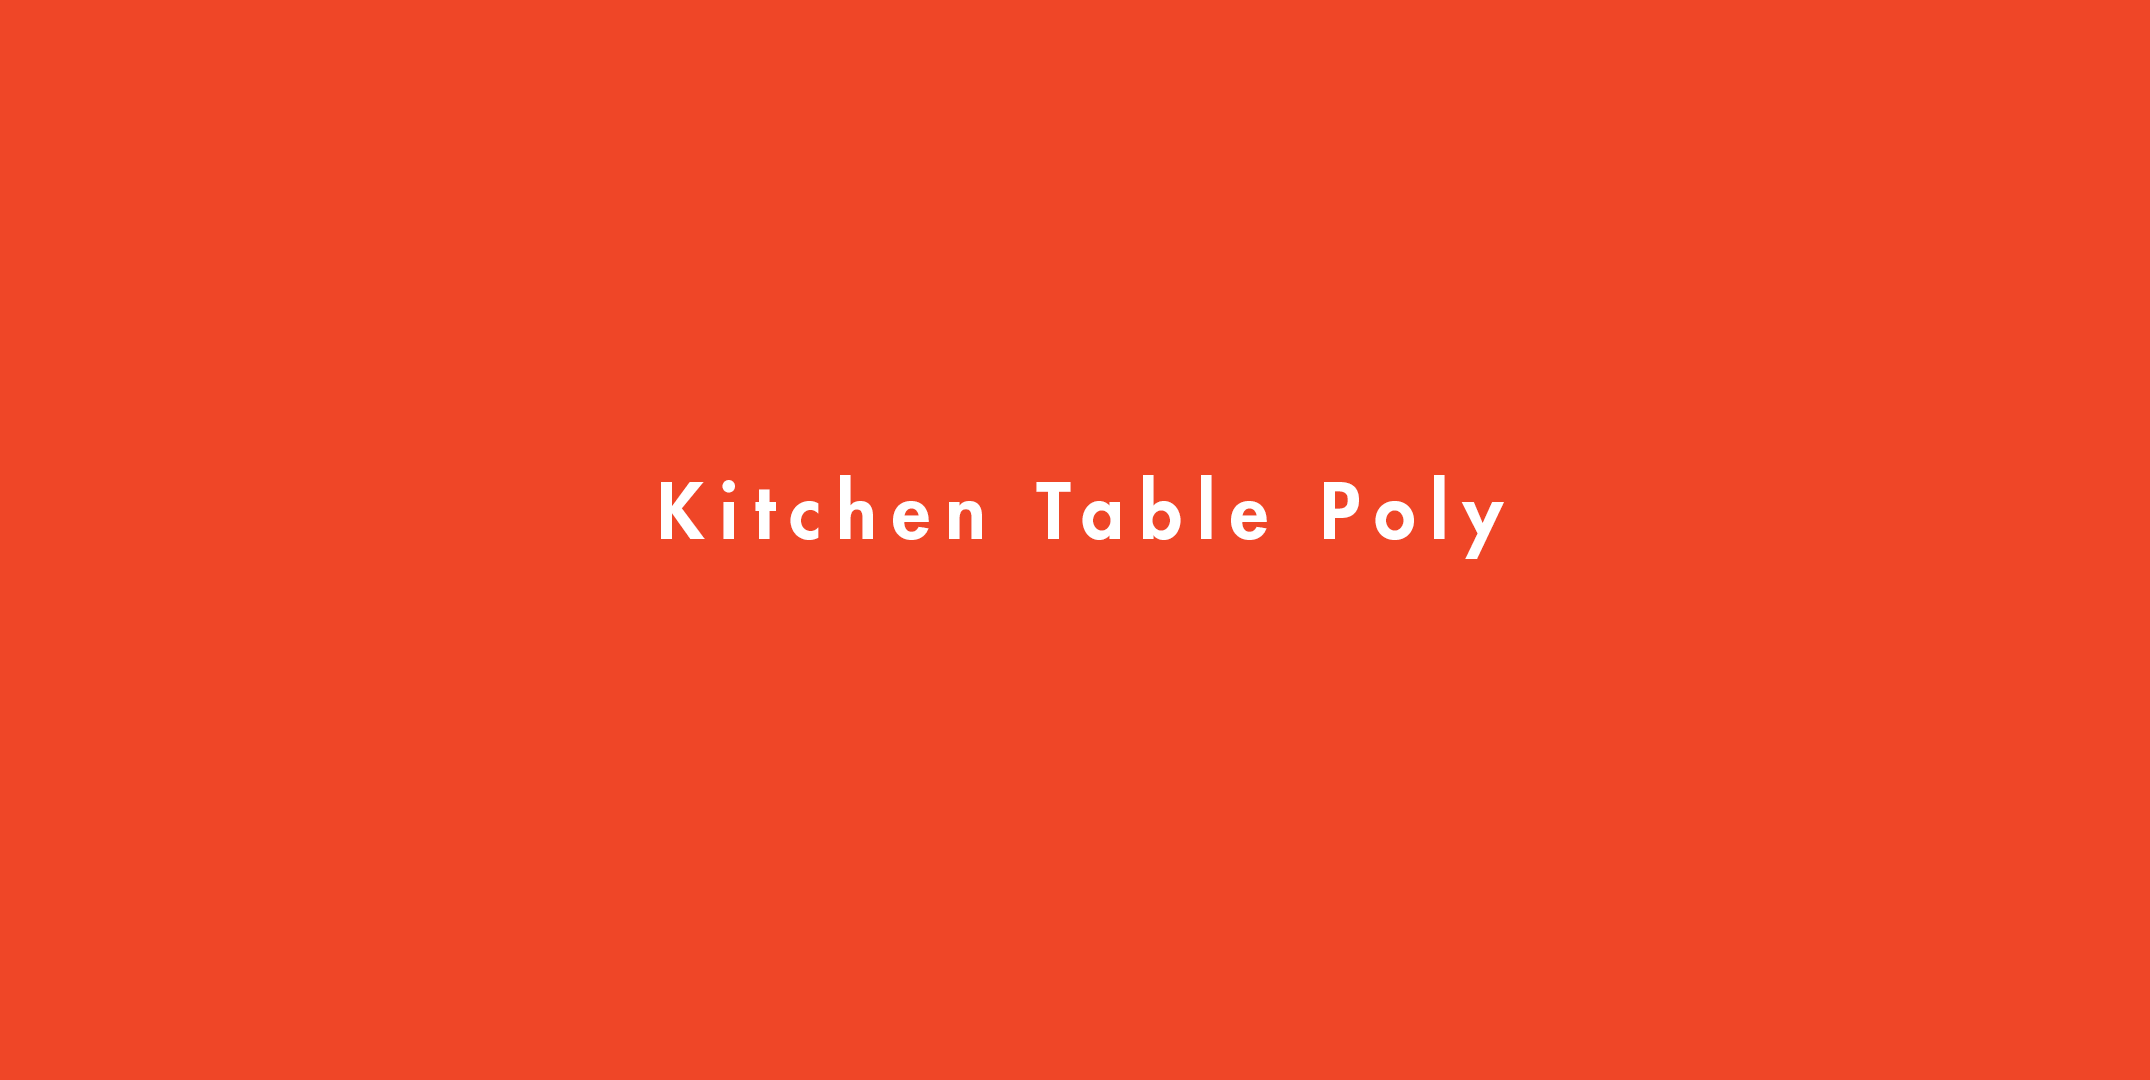 Kitchen Table Polyamory Definition- What Is Kitchen Table Poly?